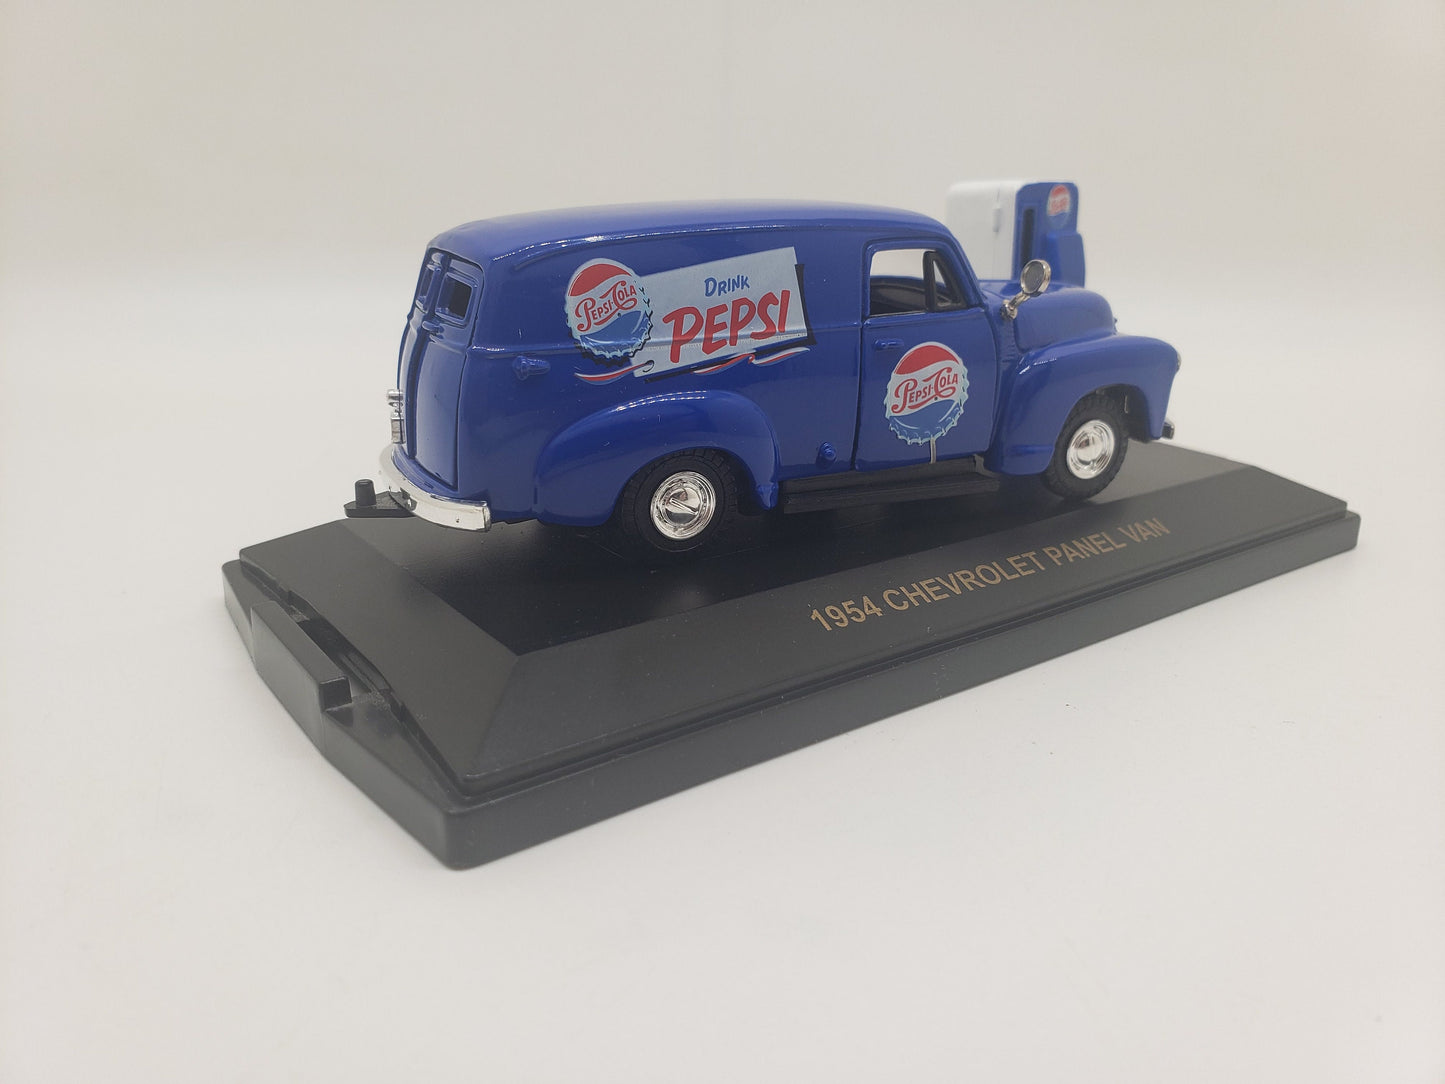 Pepsi 1954 Chevrolet Panel Van Blue Road Champs Collectable 1:43 Scale Miniature Model Toy Car Perfect Birthday Gift